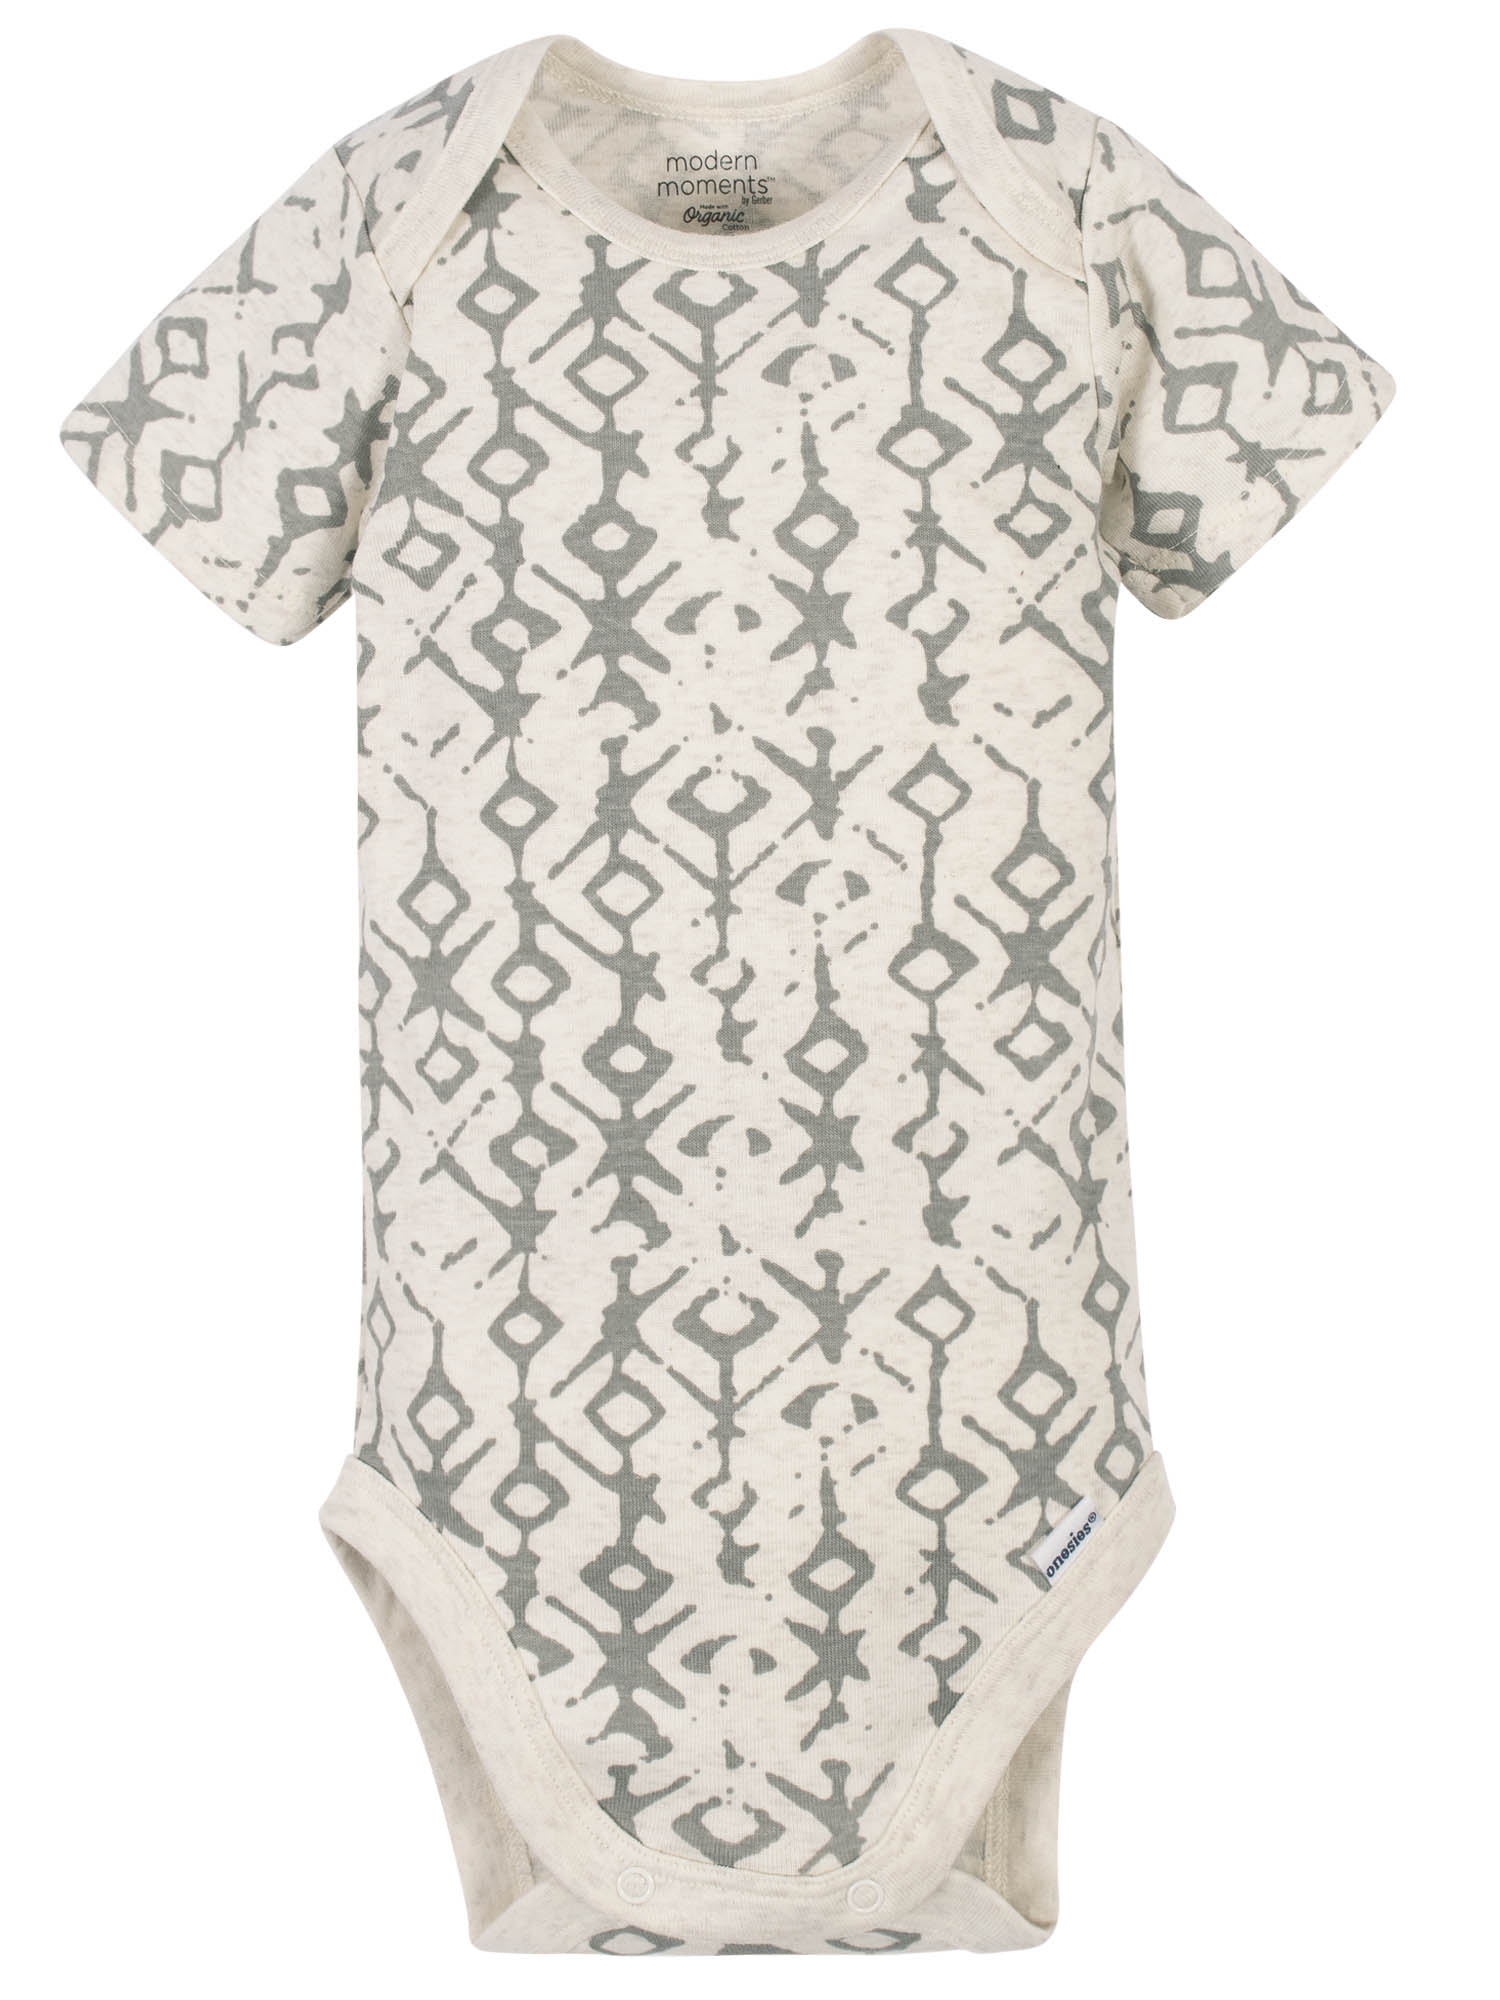 Modern Moments by Gerber Baby Boy Bodysuits, 4-Pack, Newborn-12 Months - image 5 of 6